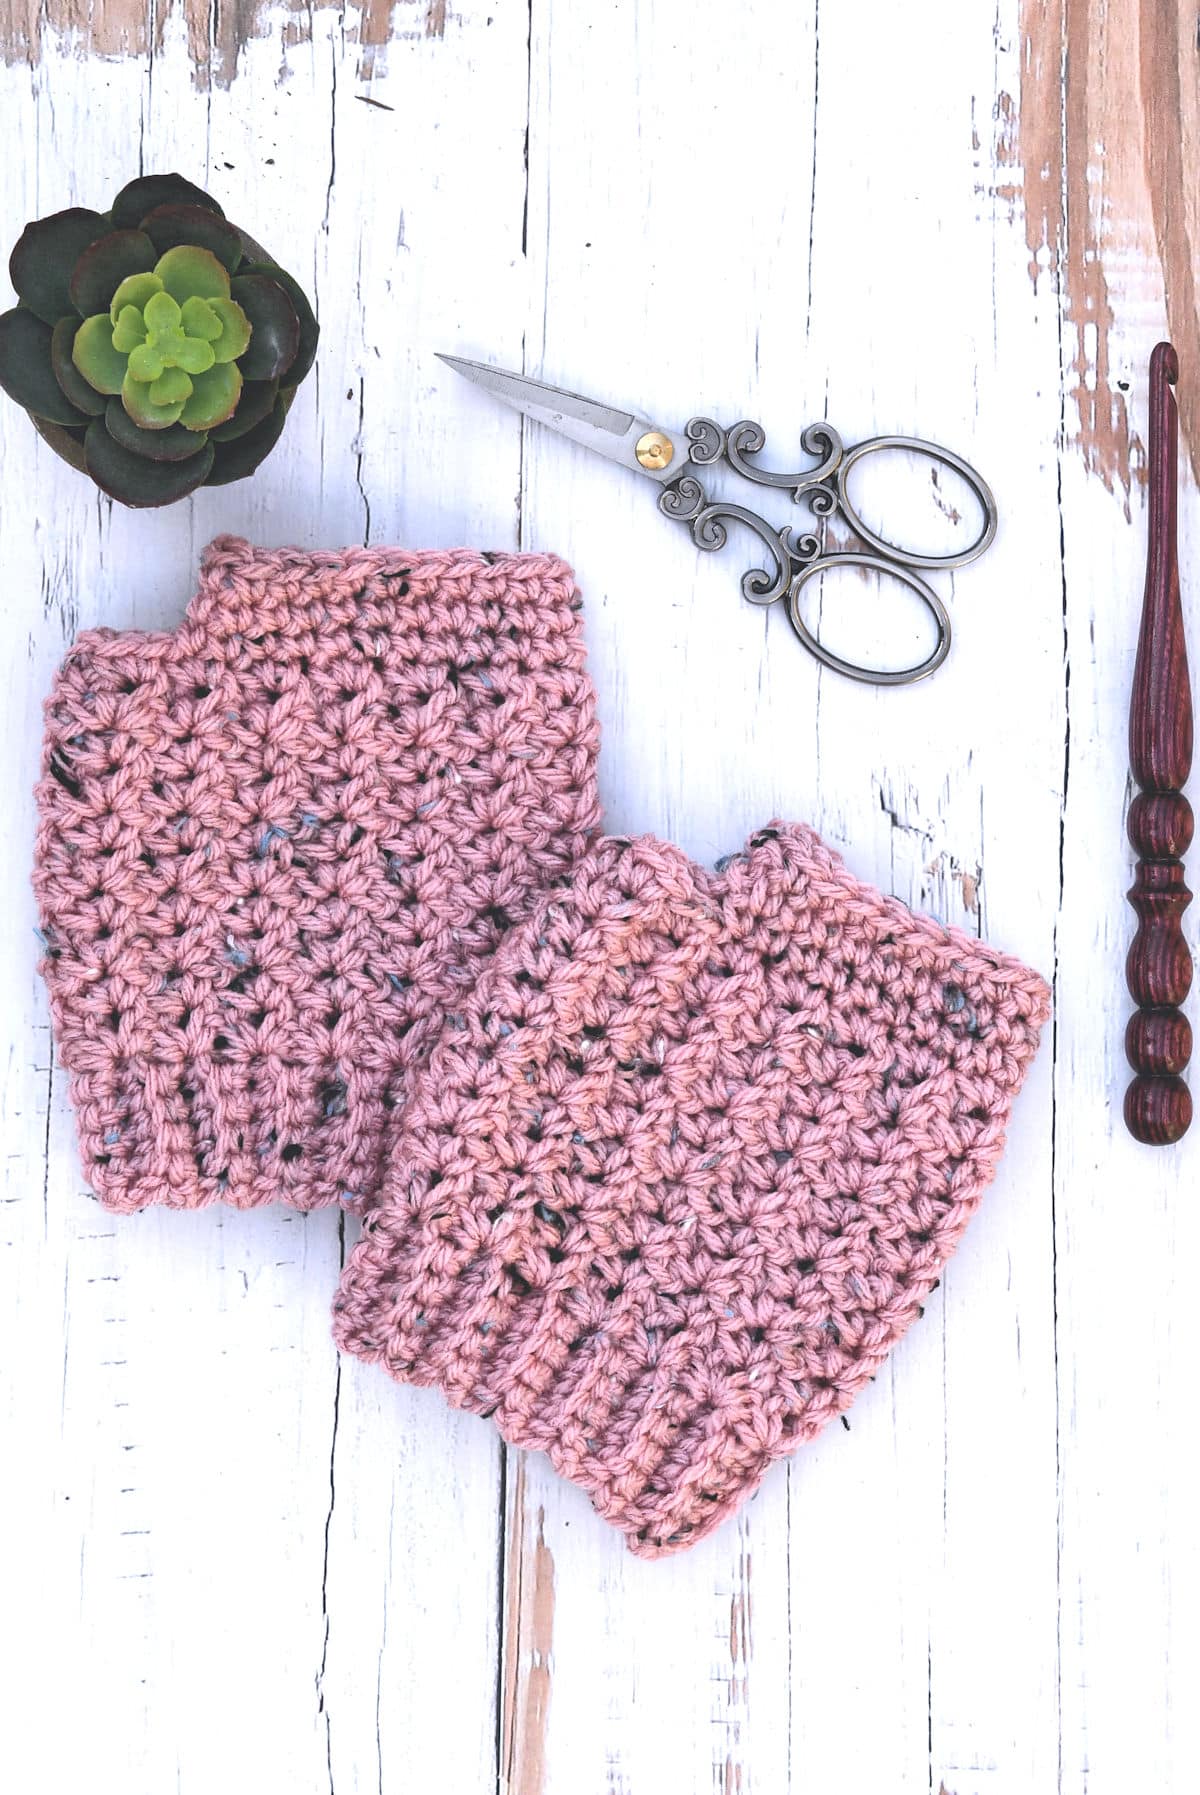 Quick Crochet Fingerless Mitts Pattern in worsted weight by Kim Guzman